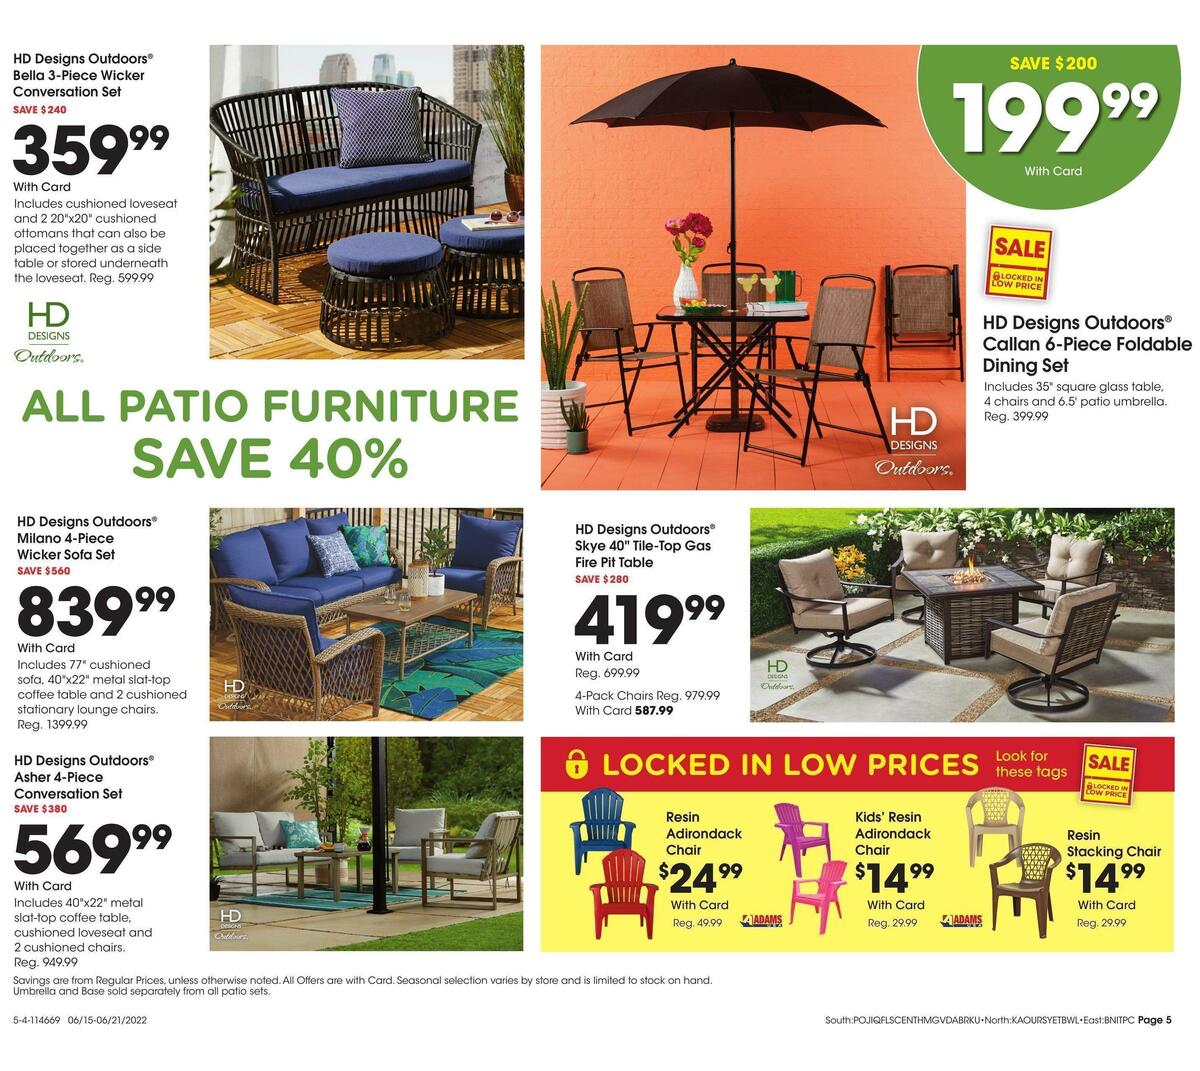 Fred Meyer General Merchandise Weekly Ad from June 15